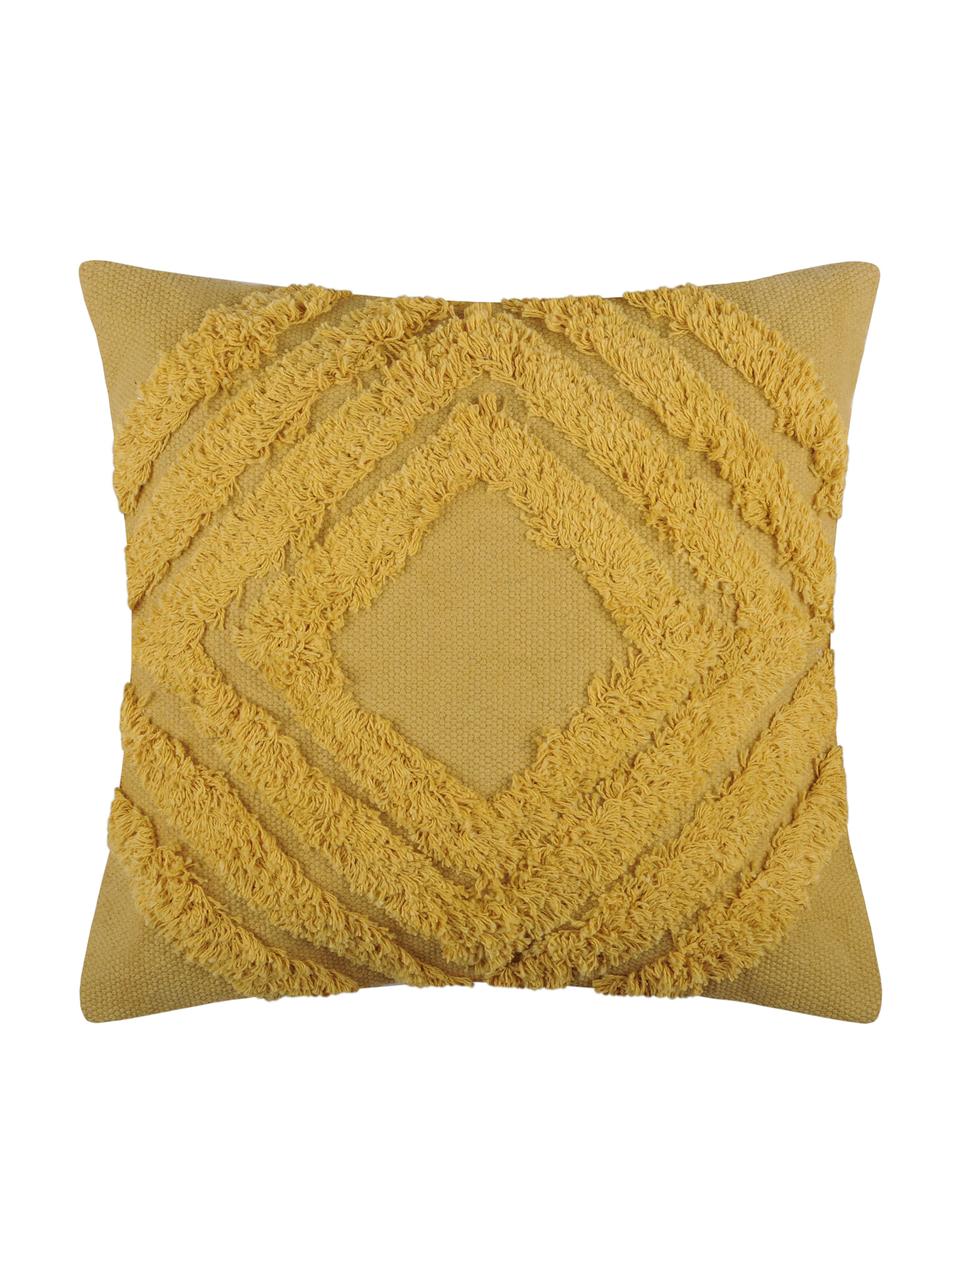 Coussin 40x40 jaune moutarde Greenmood, Jaune moutarde